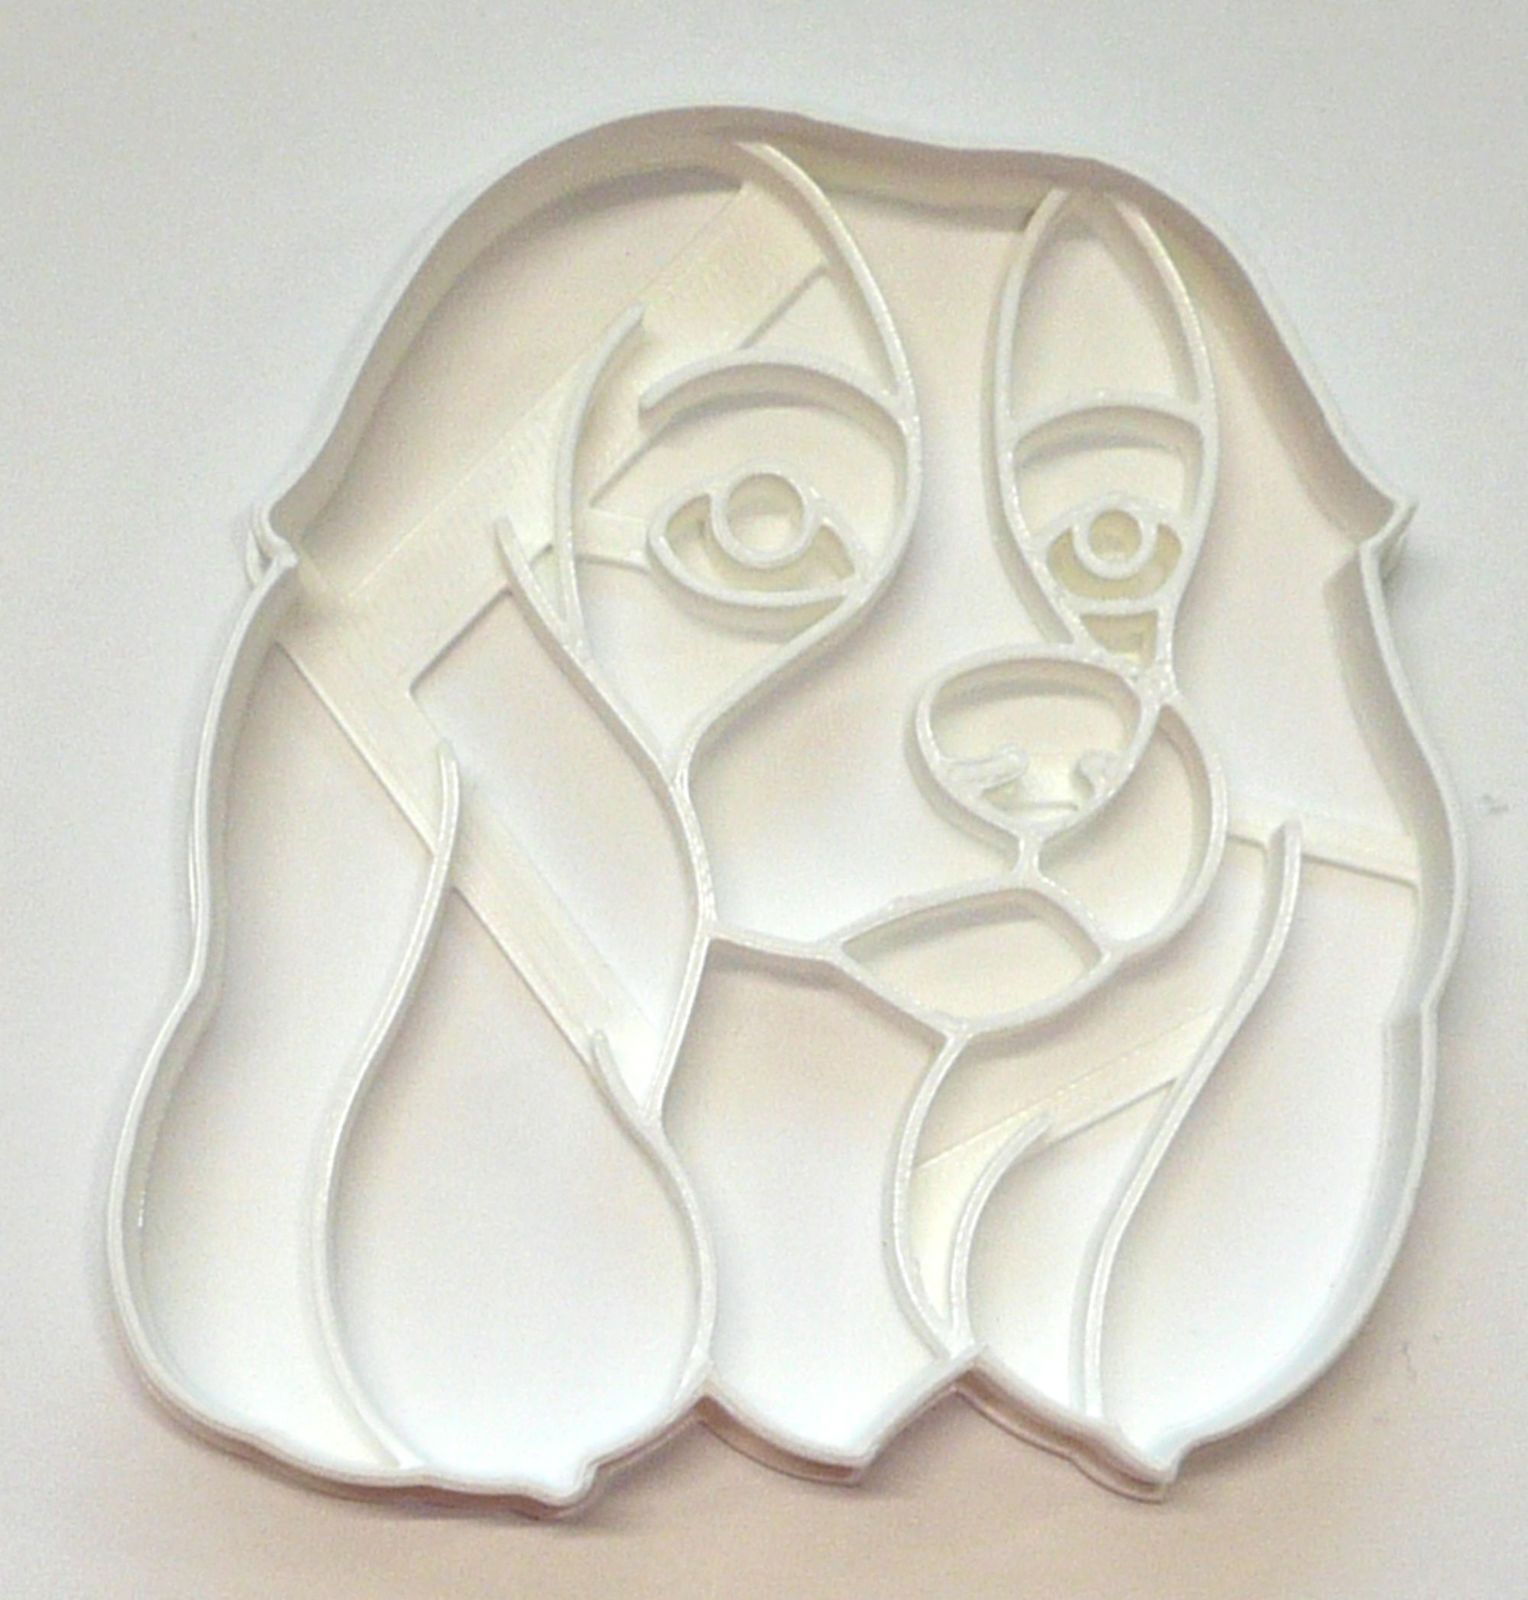 Cavalier King Charles Spaniel Dog Face Detailed Cookie Cutter USA PR4031 - $3.99